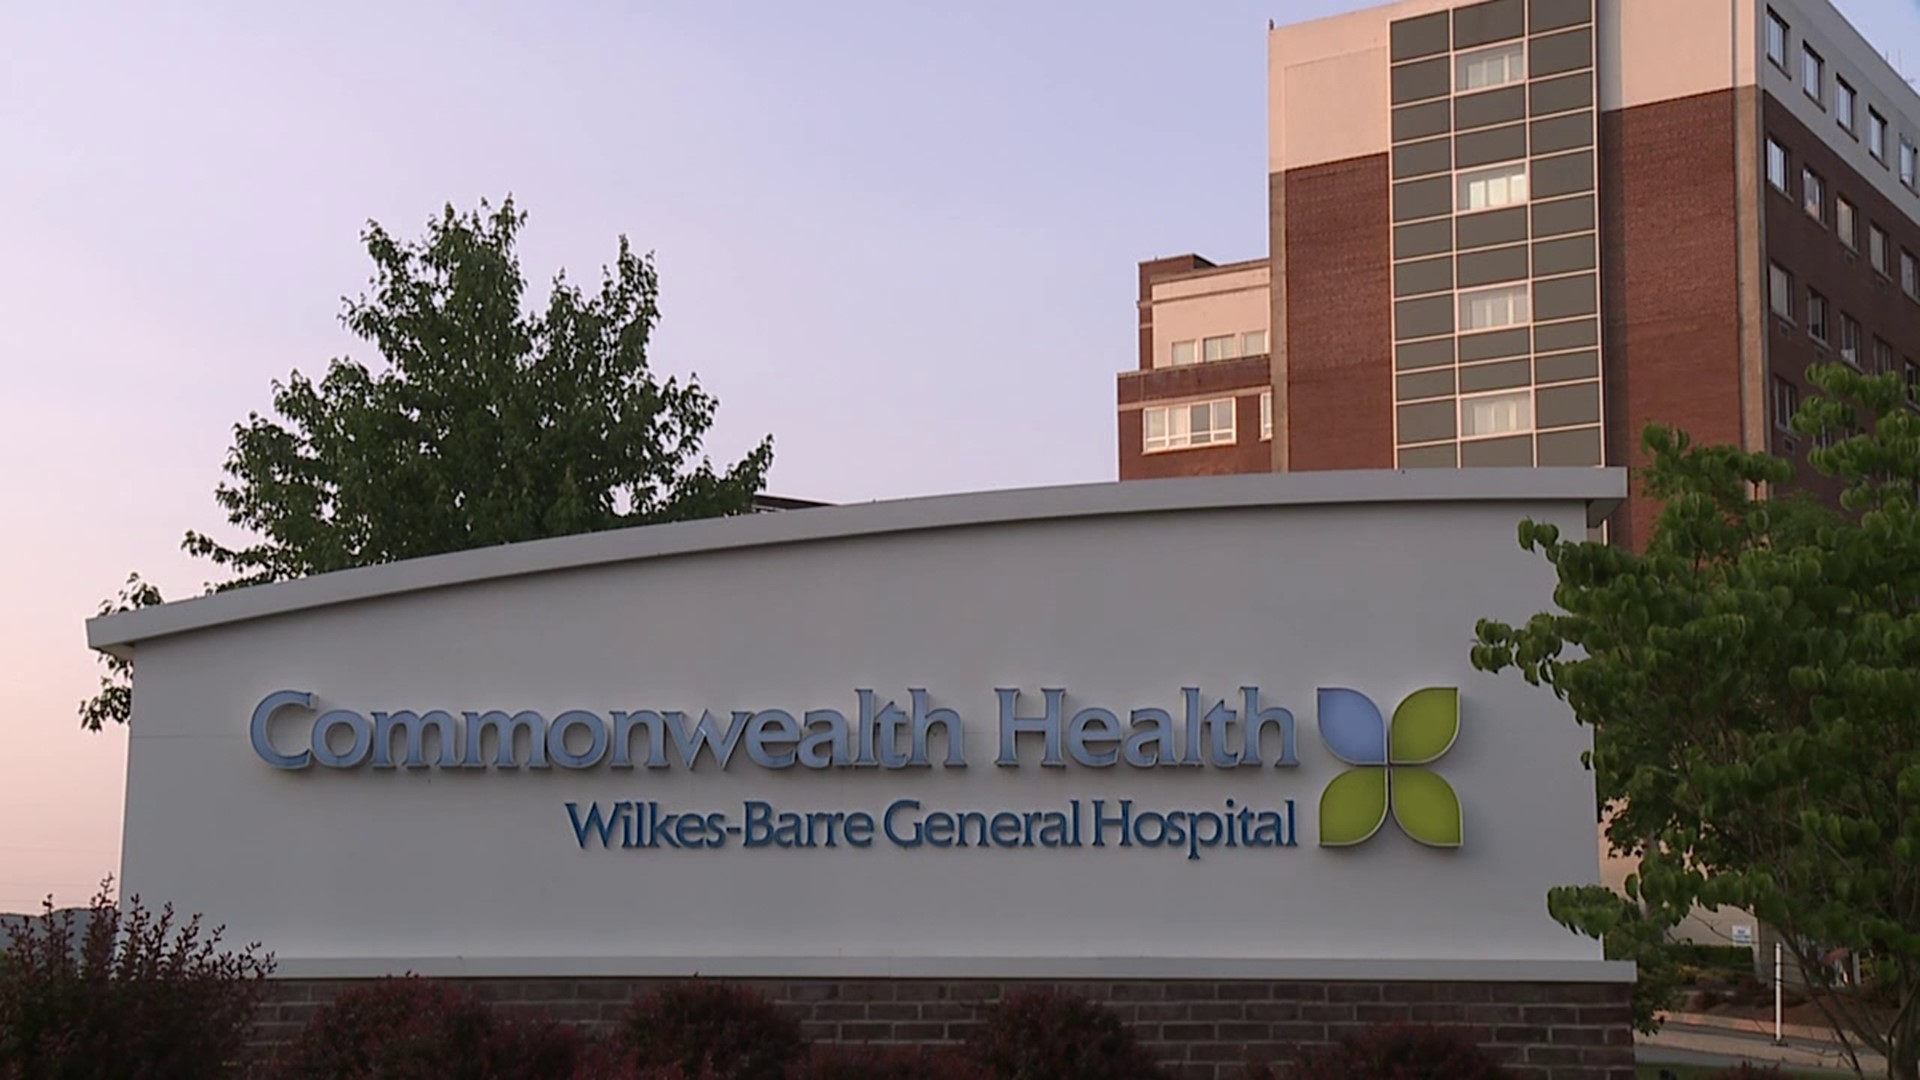 OBGYN providers at Wilkes-Barre General Hospital must close their practices on July 31.